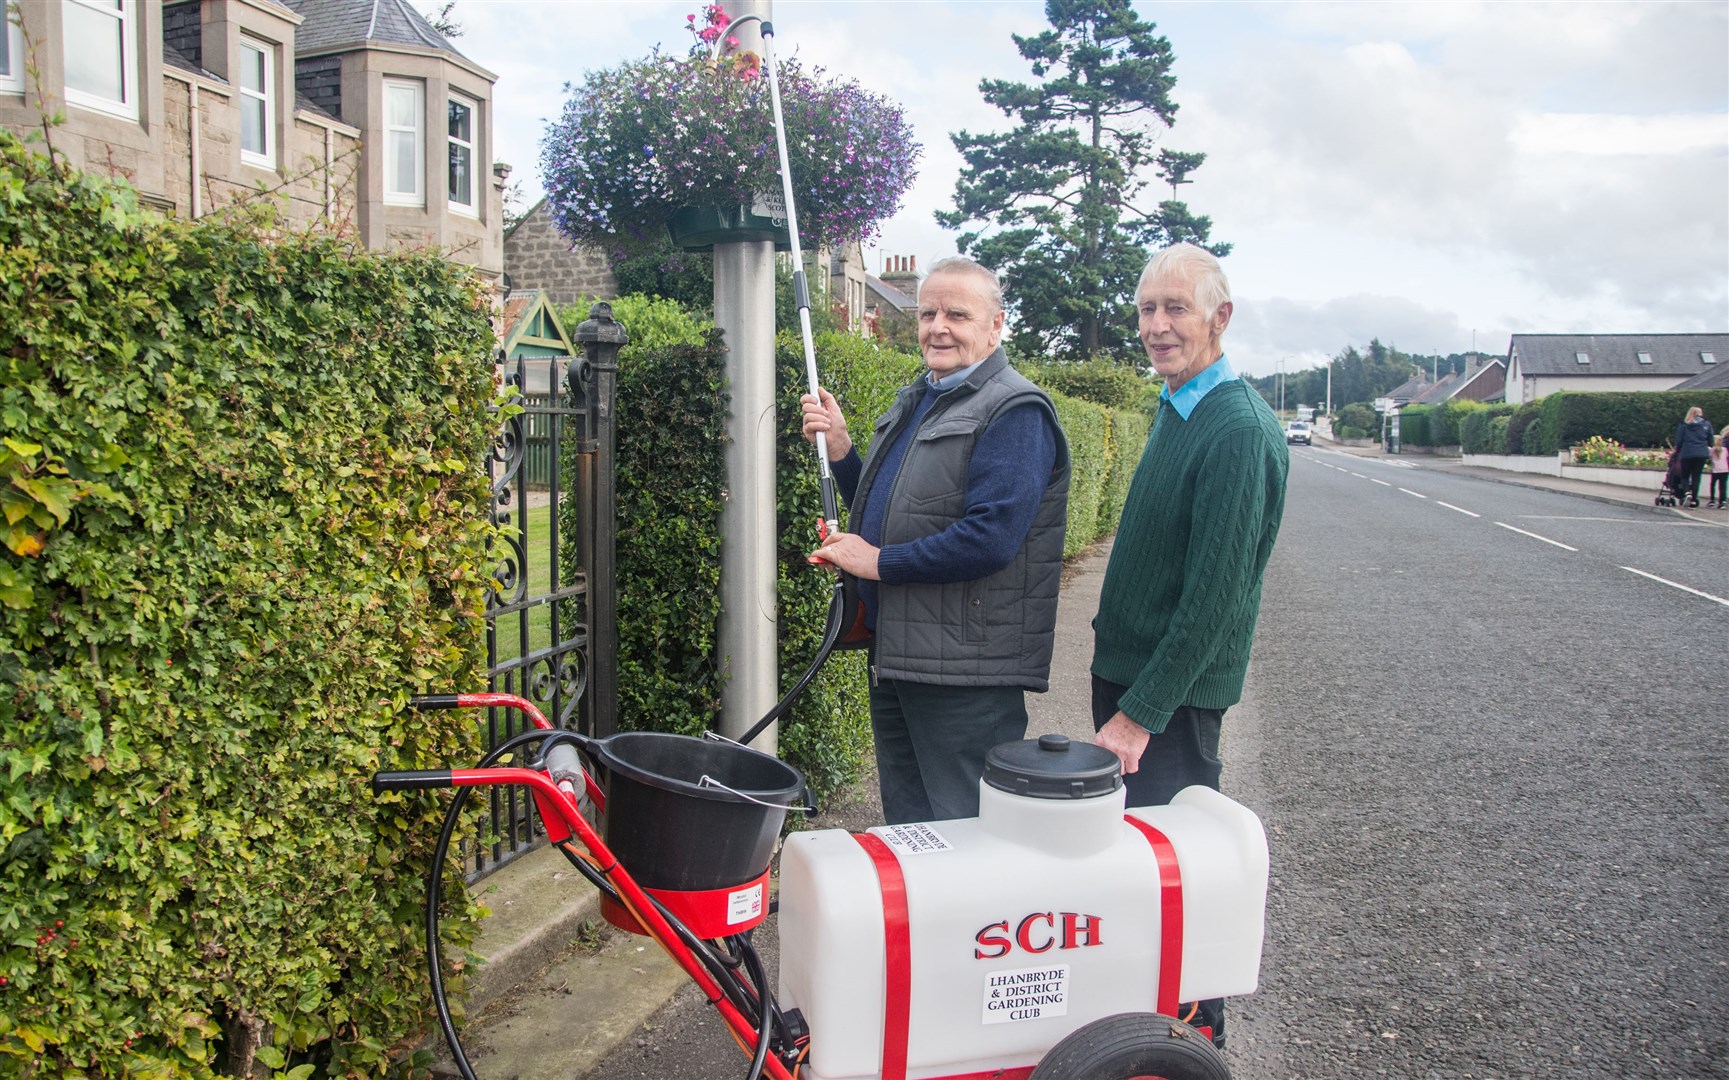 Ian Ogg and Bill Clarihew, of Lhanbryde and District Gardening Club, put the new equipment to the test. Picture: Becky Saunderson.